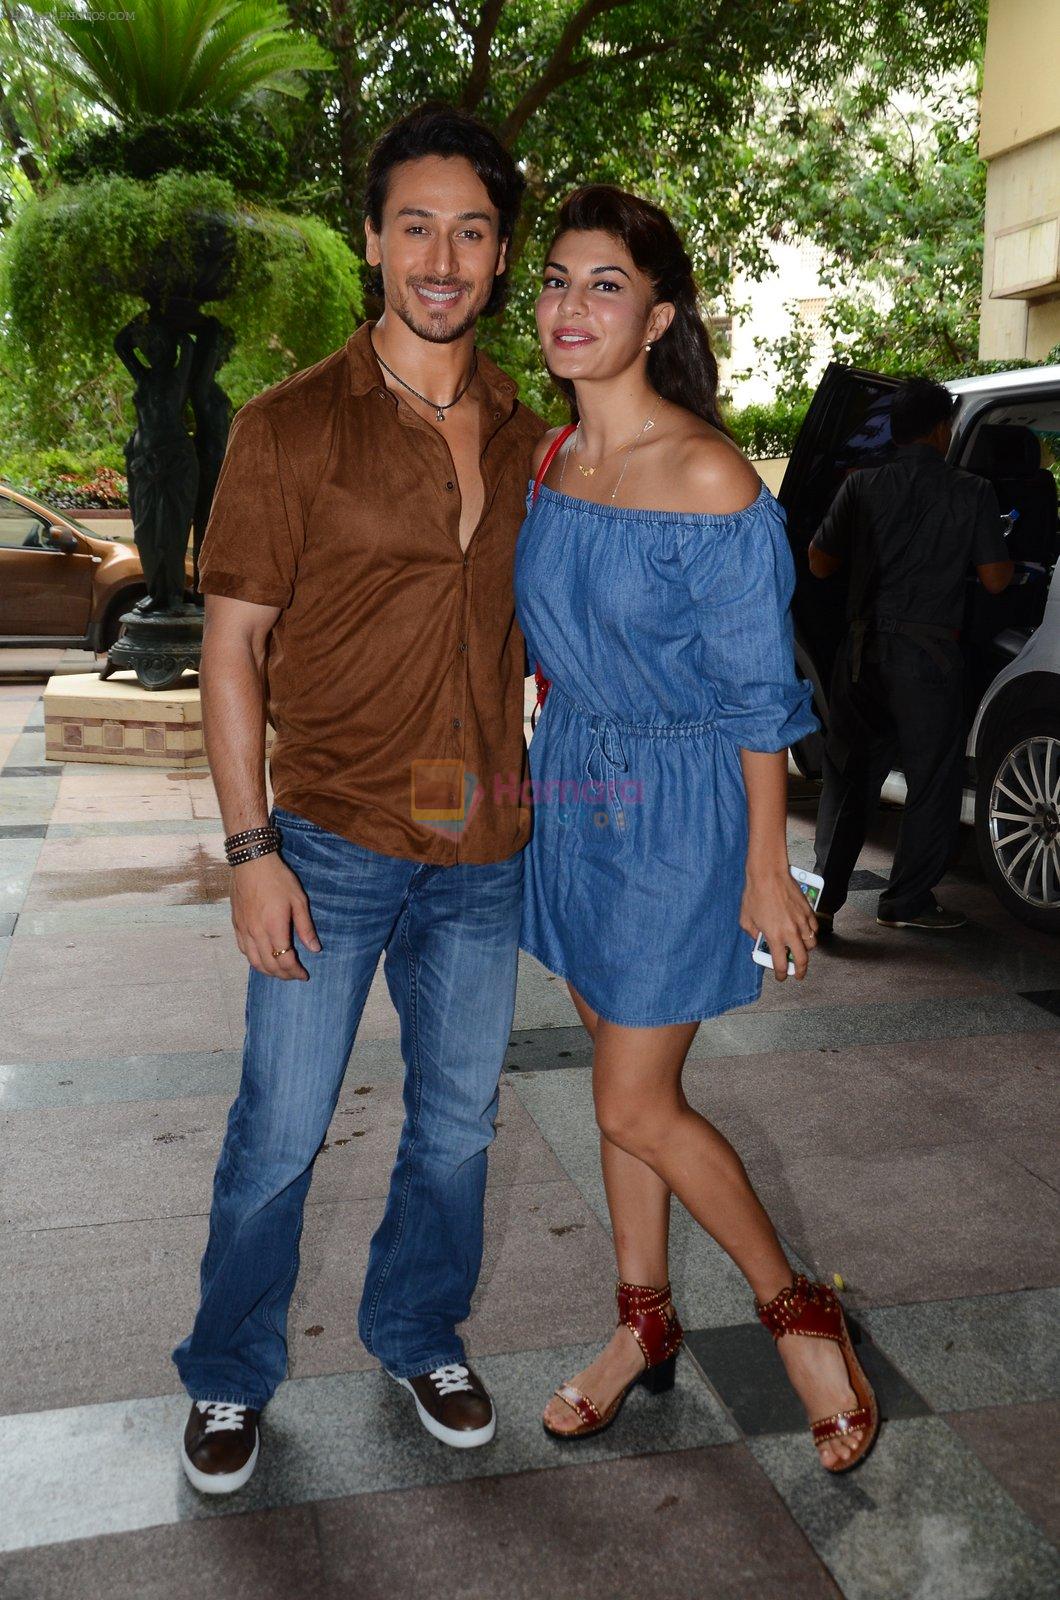 Tiger Shroff and Jacqueline Fernandez at Flying Jatt song launch at Radio City in Mumbai on August 3, 3016